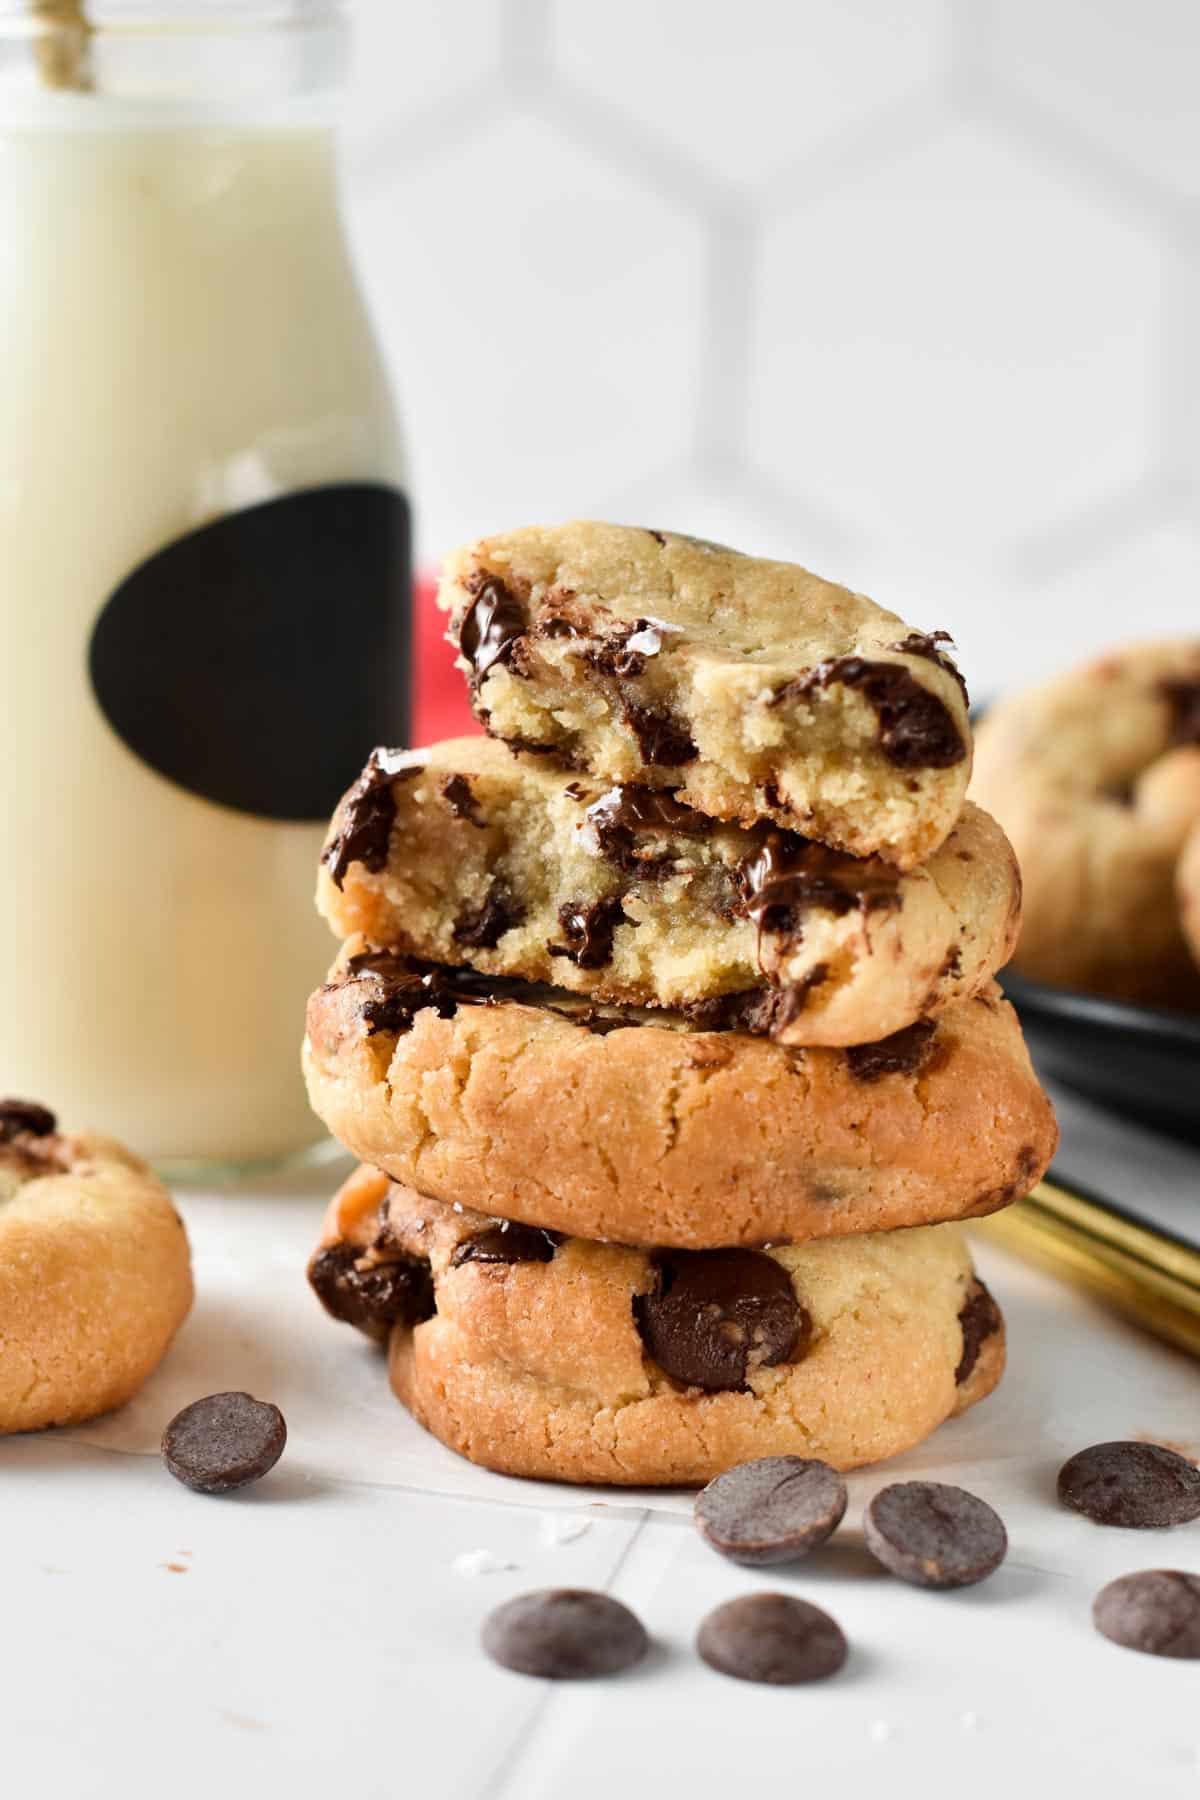 Stack of eggless chocolate chips cookies in front of a glass bottle of almond milk.